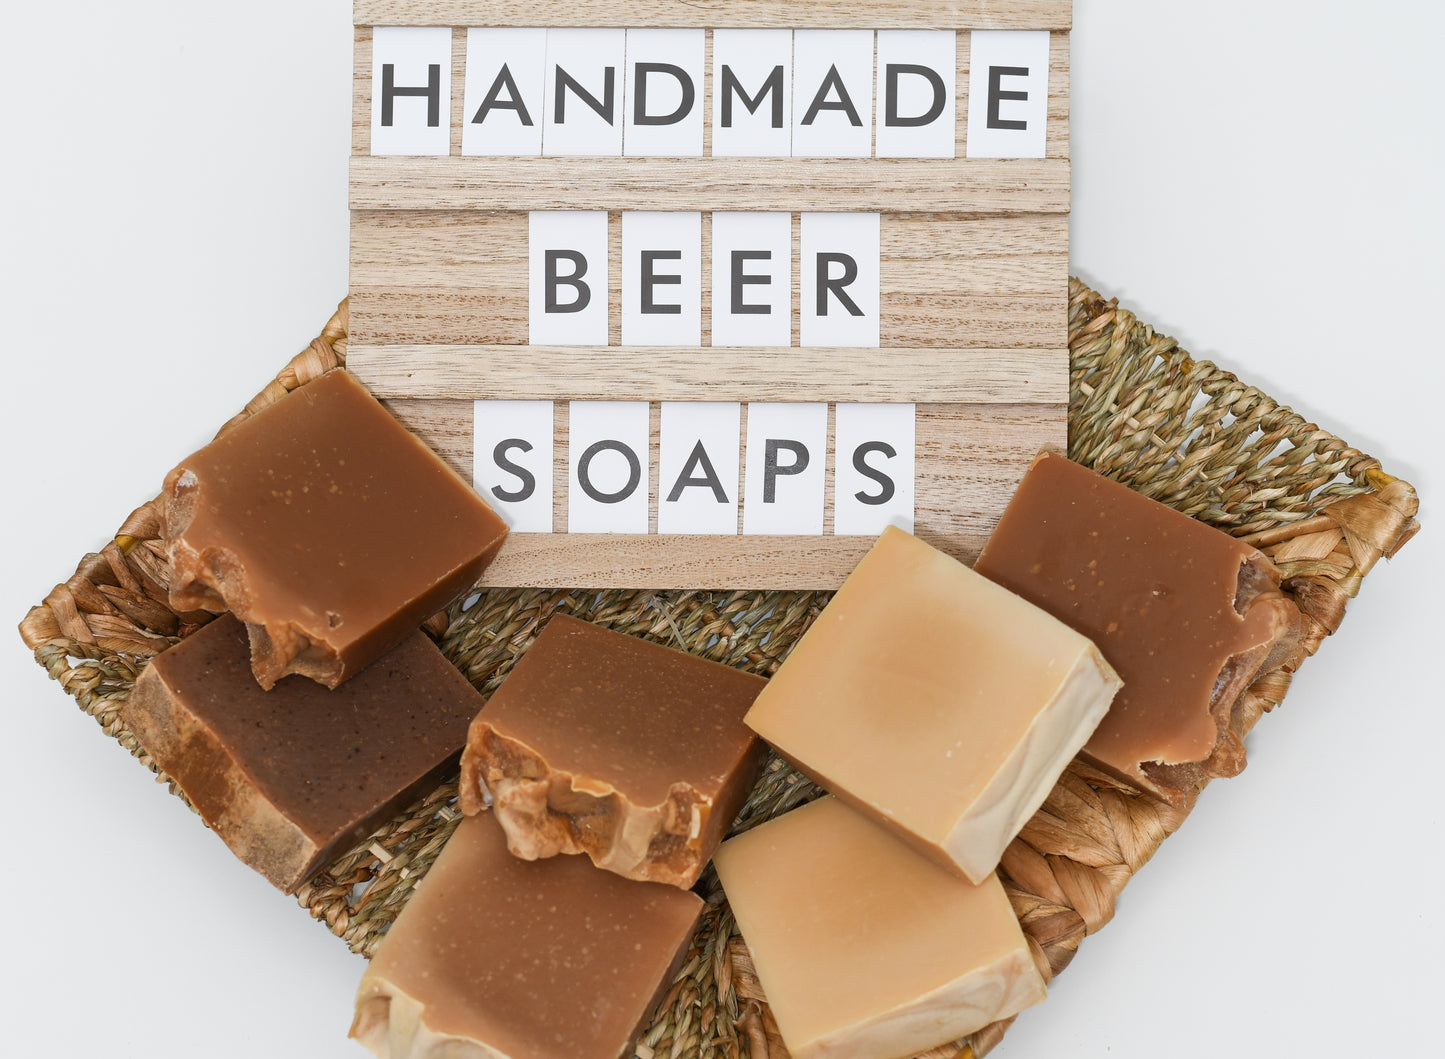 Handmade Beer Soap Box, your choice of 3 Handmade Beer Soaps